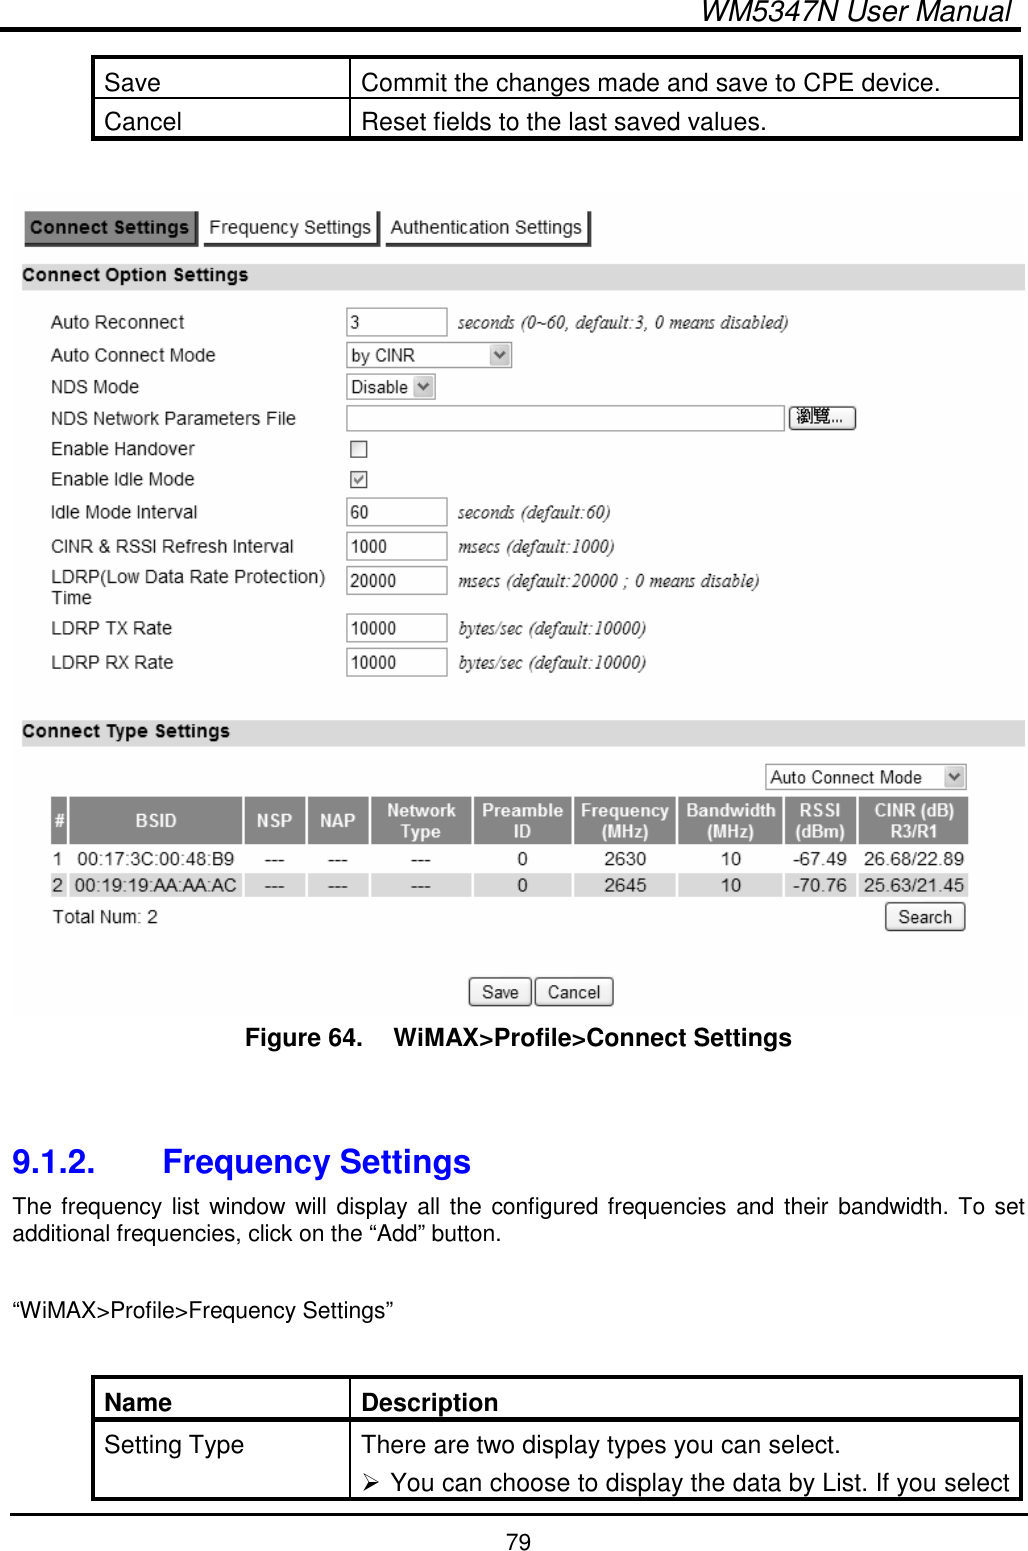  WM5347N User Manual  79 Save  Commit the changes made and save to CPE device. Cancel  Reset fields to the last saved values.   Figure 64.   WiMAX&gt;Profile&gt;Connect Settings   9.1.2.  Frequency Settings The frequency list window will display all the configured frequencies and their bandwidth. To set additional frequencies, click on the “Add” button.  “WiMAX&gt;Profile&gt;Frequency Settings”  Name  Description Setting Type  There are two display types you can select.  You can choose to display the data by List. If you select 